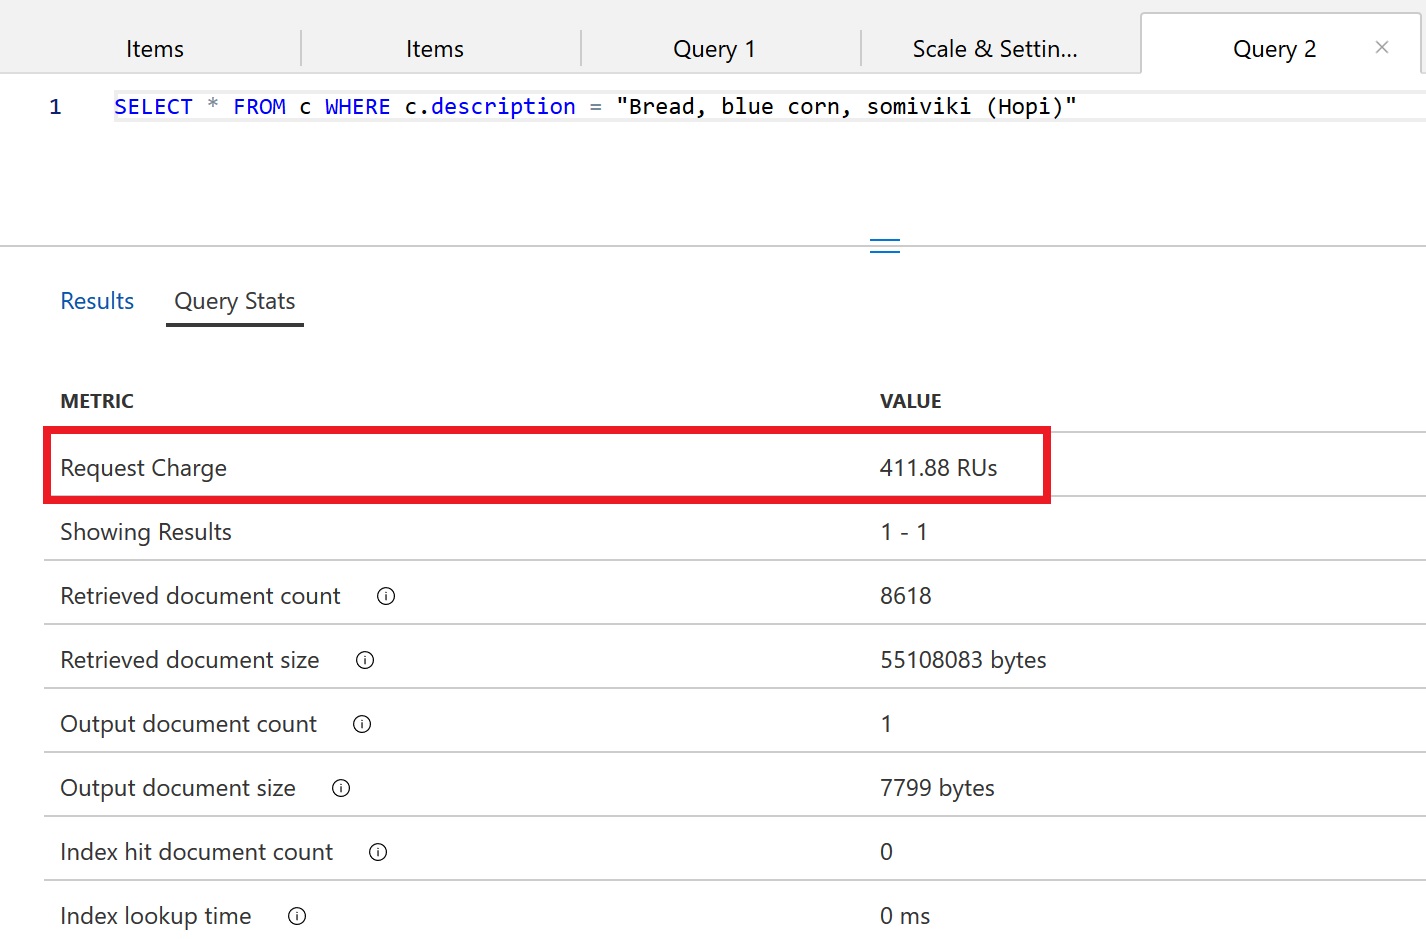 Query metrics are displayed for the previous query